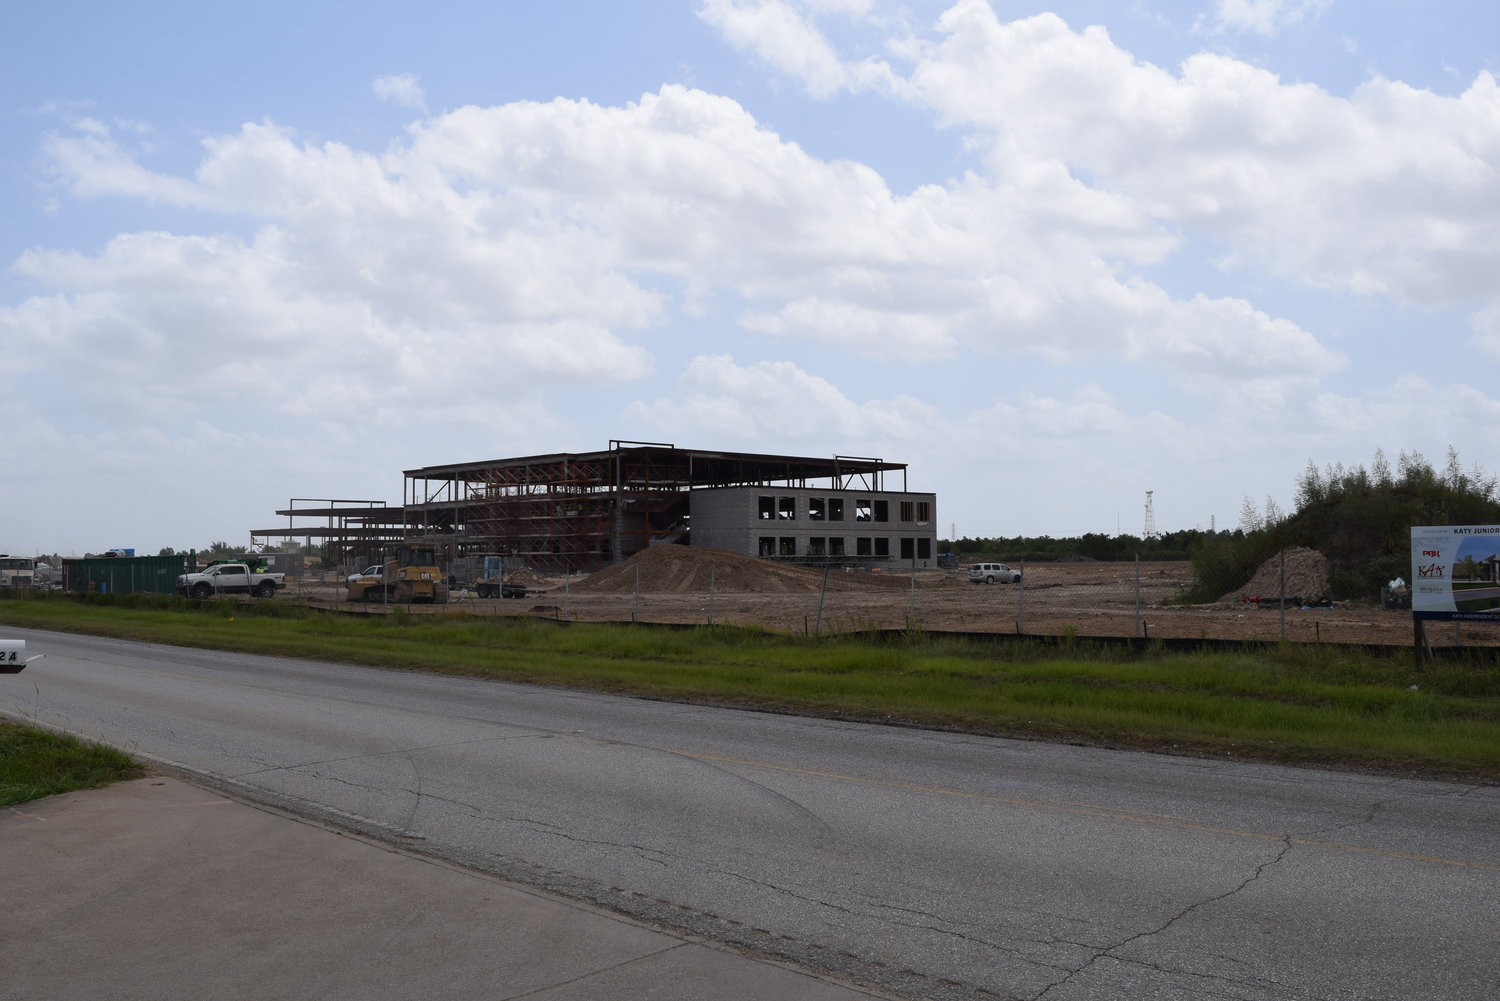 Construction is well underway on Katy Junior High No. 17. The new facility has a budget of more than $60 million that was approved by voters in a 2017 bond election. The facility is located in the southeastern corner of the intersection of Katy Hockley Road and Clay Road. District staff have said the new campus is necessary as development continues to push the district’s student body growth over the next several years.